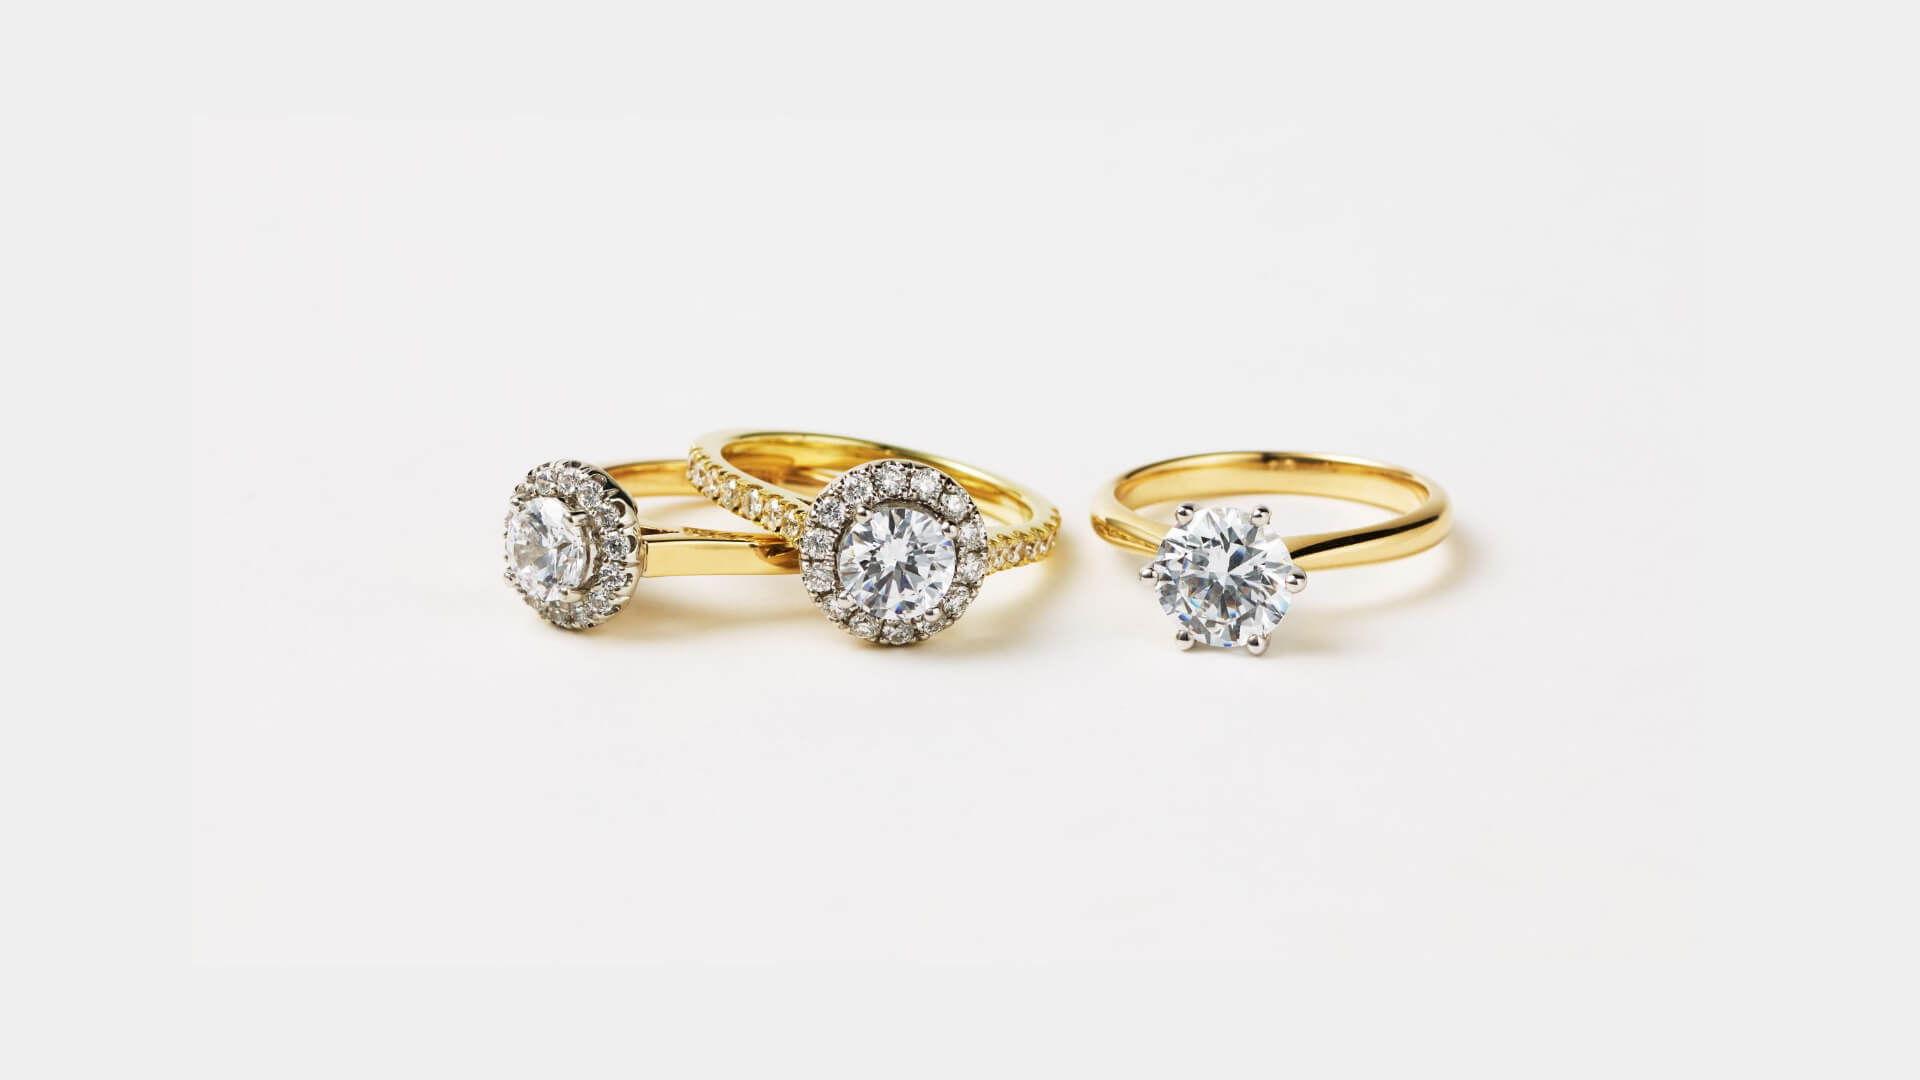 Our Guide to Engagement Ring Styles